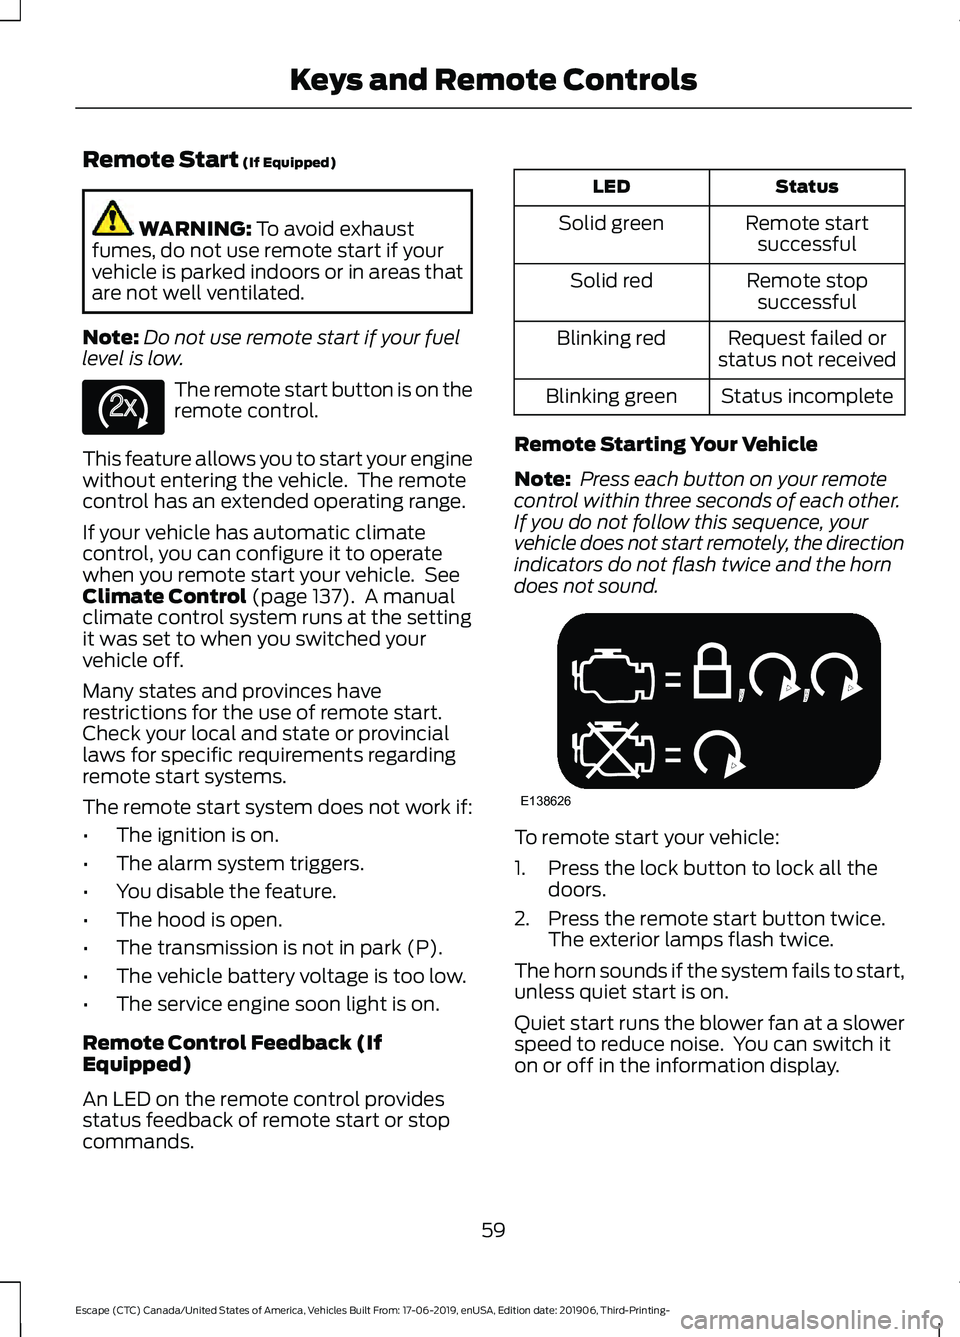 FORD ESCAPE 2020  Owners Manual Remote Start (If Equipped)
WARNING: 
To avoid exhaust
fumes, do not use remote start if your
vehicle is parked indoors or in areas that
are not well ventilated.
Note: Do not use remote start if your f